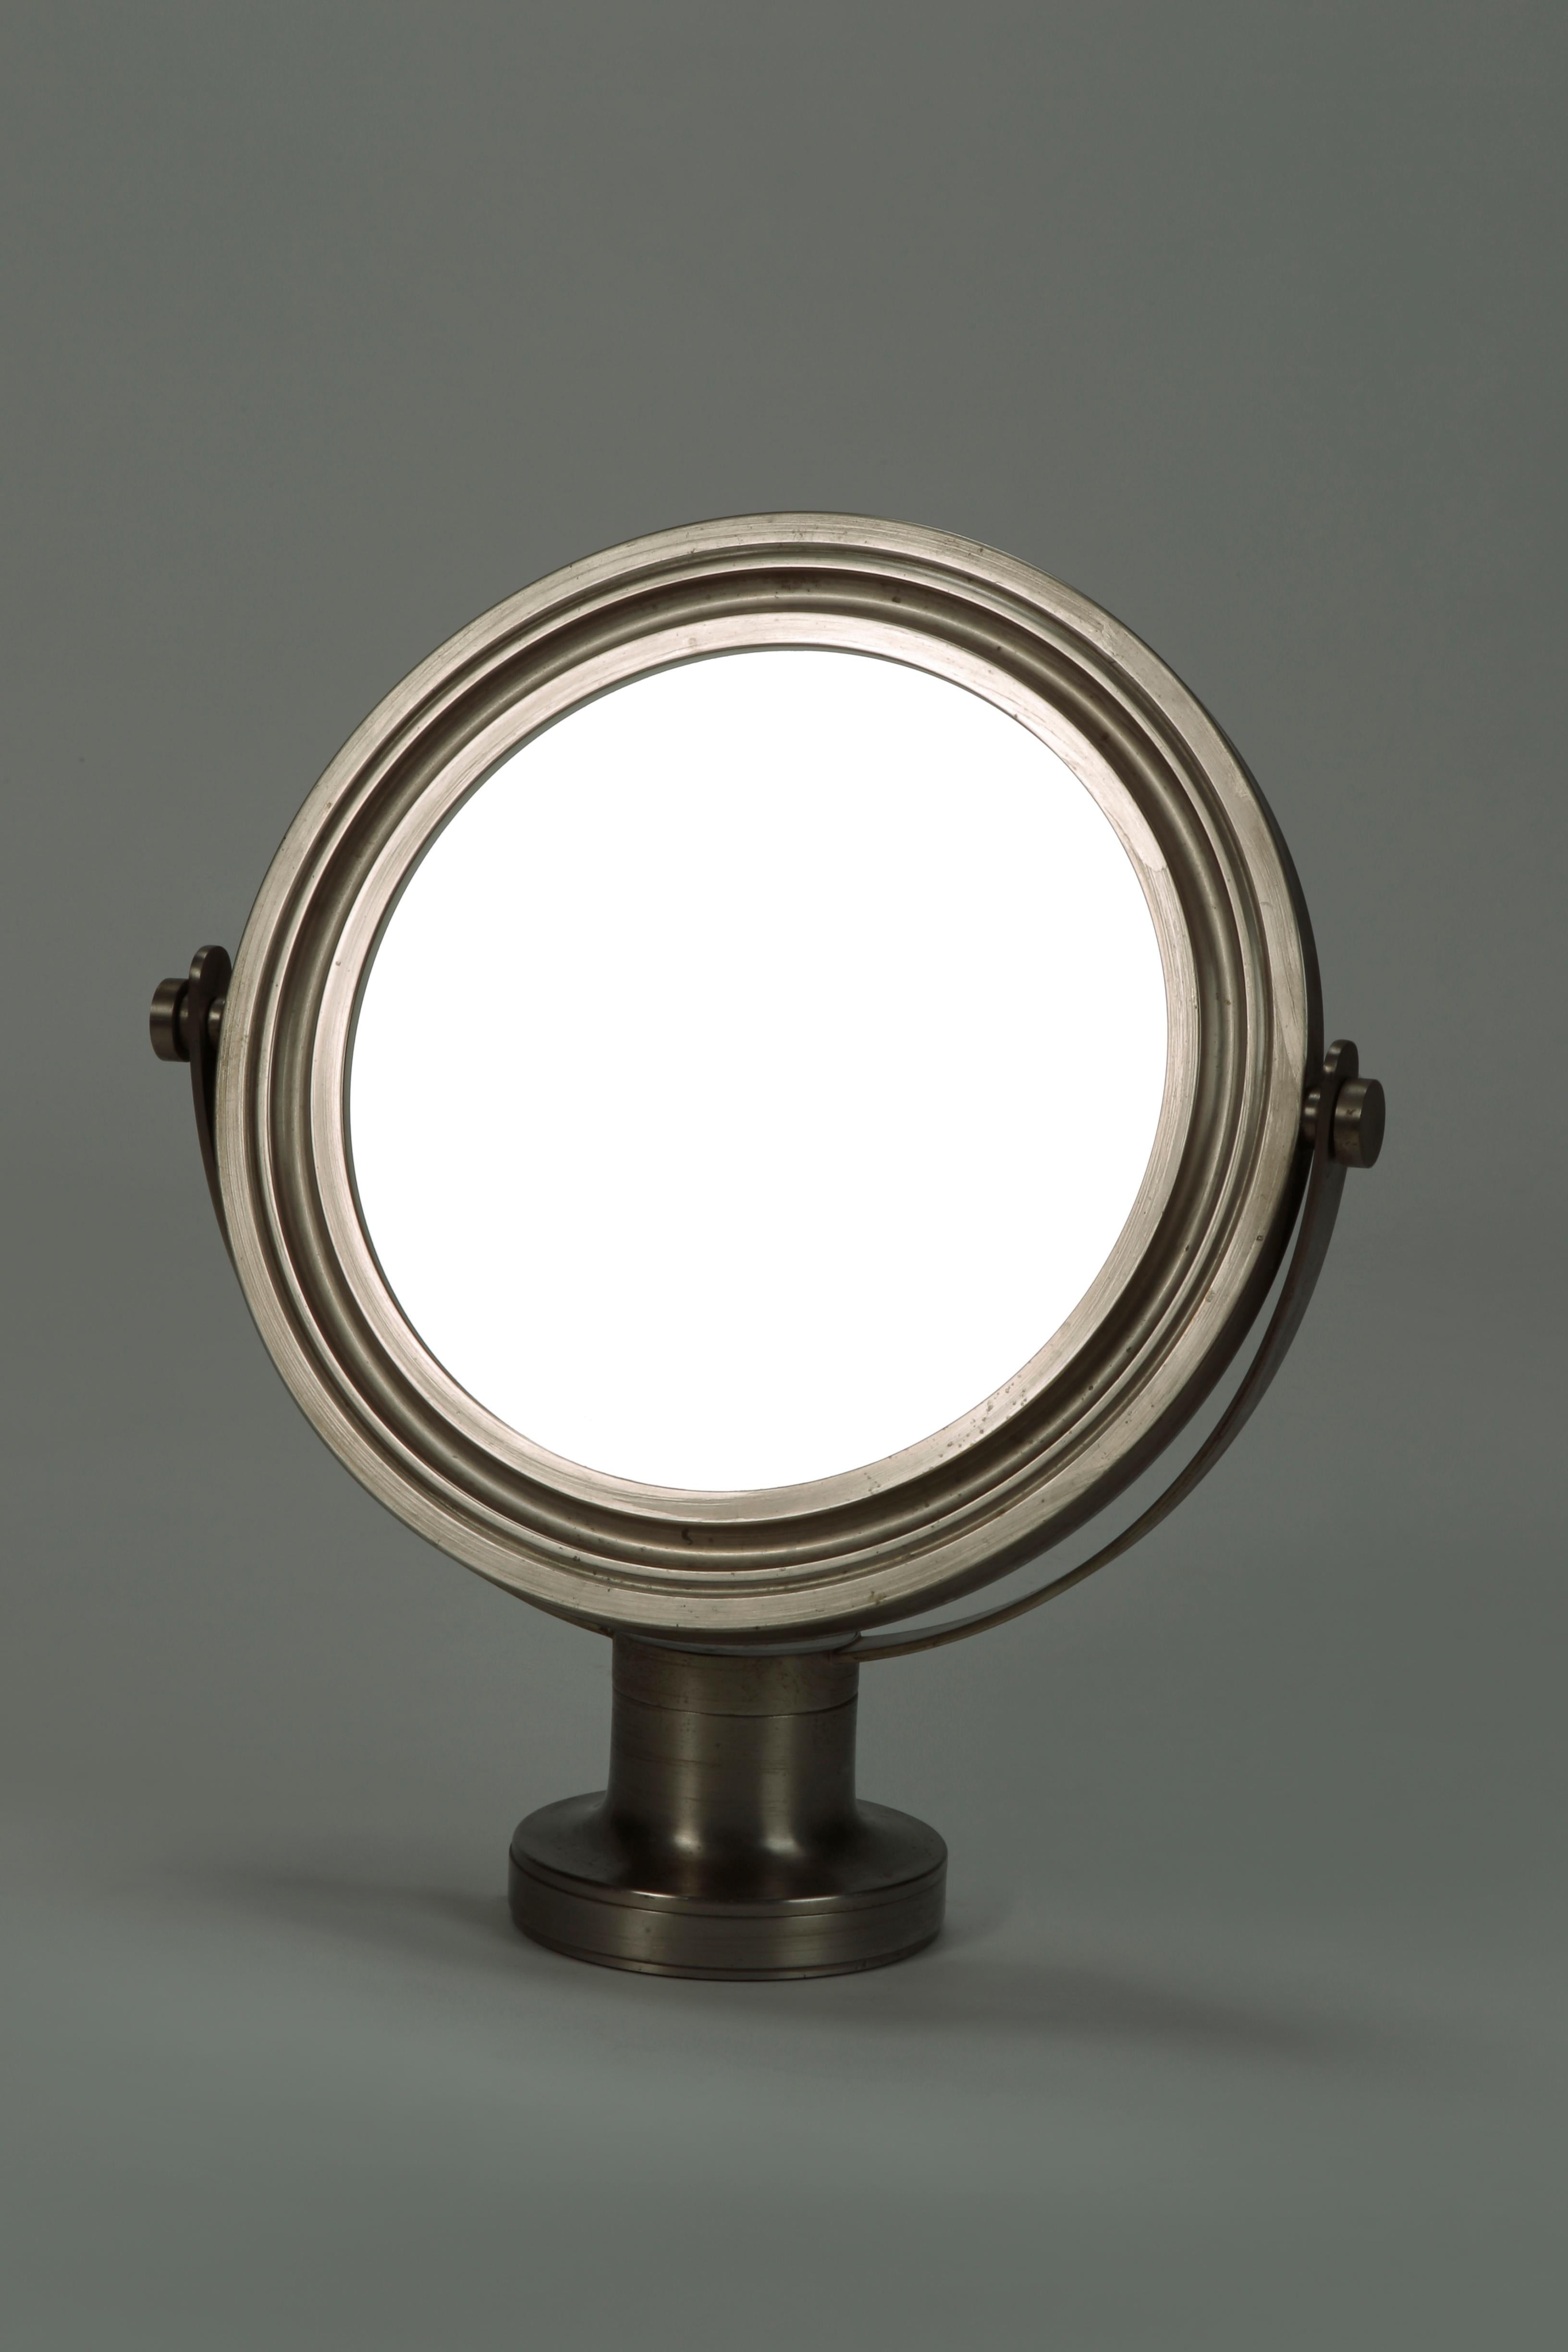 Narciso mirror by Sergio Mazza from the 60 years for Artemide Milano. With stable base and tiltable round mirror. Metal frame in original slightly opaque surface. Very good vintage condition.